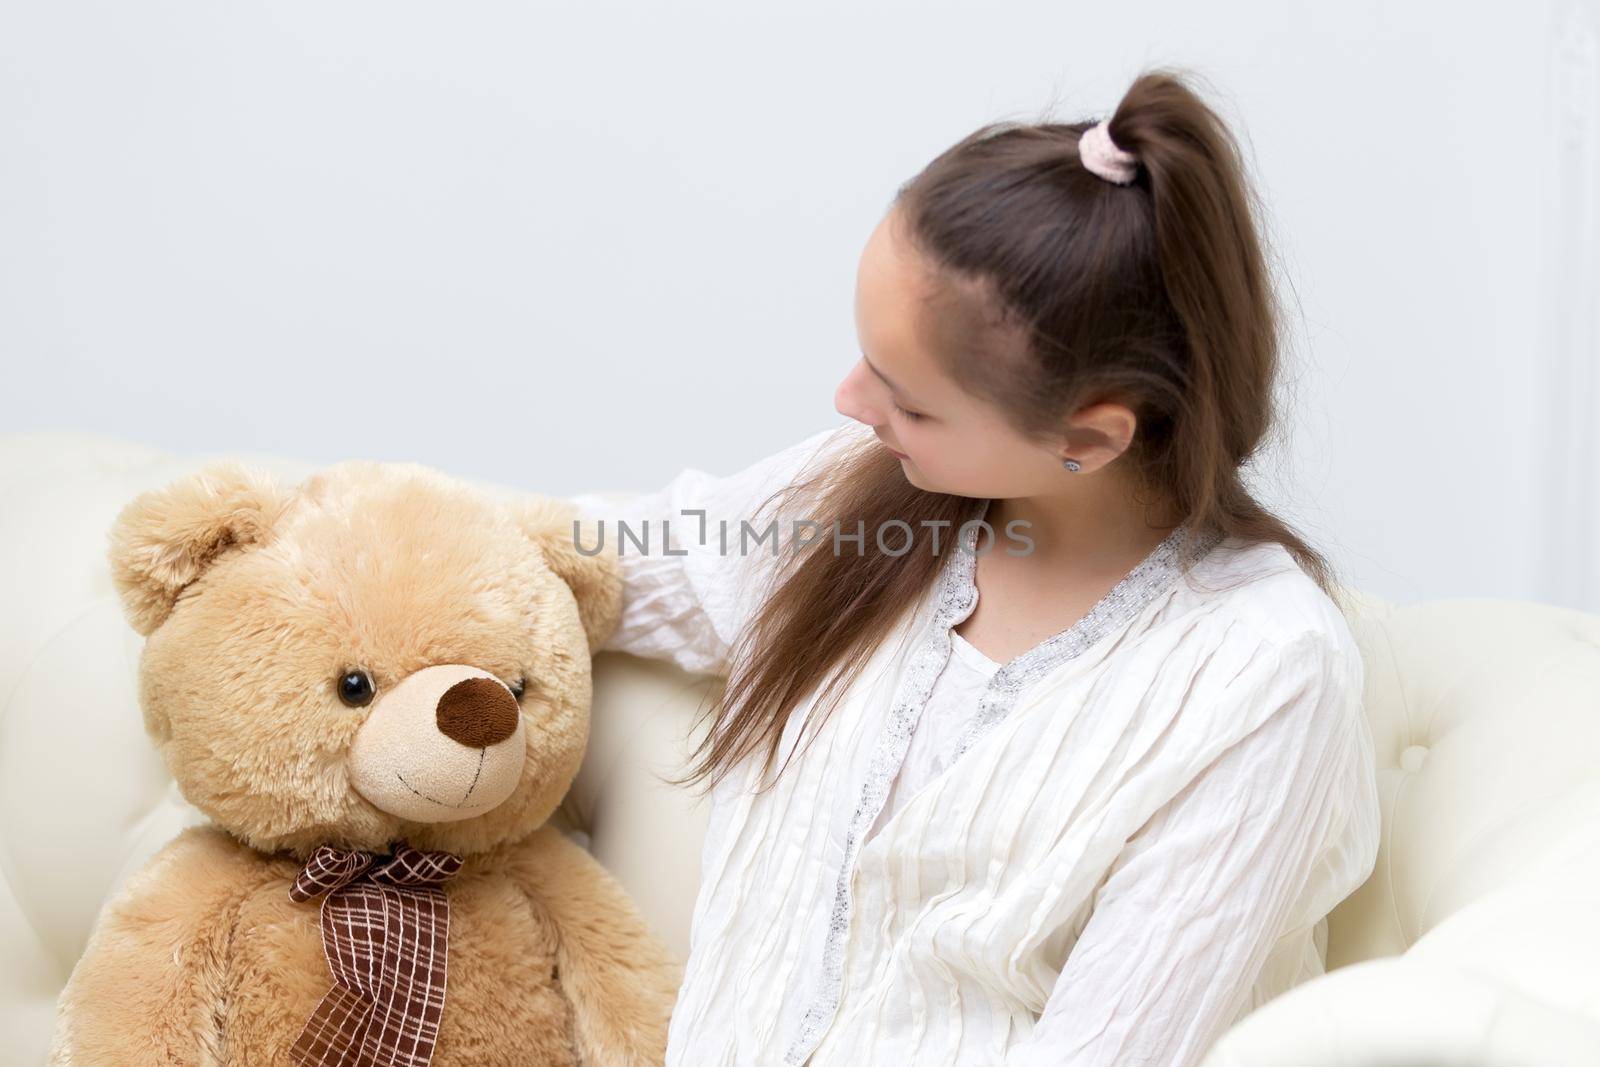 Beautiful little girl schoolgirl embraces with a teddy bear. The concept of a happy childhood, children's emotions.